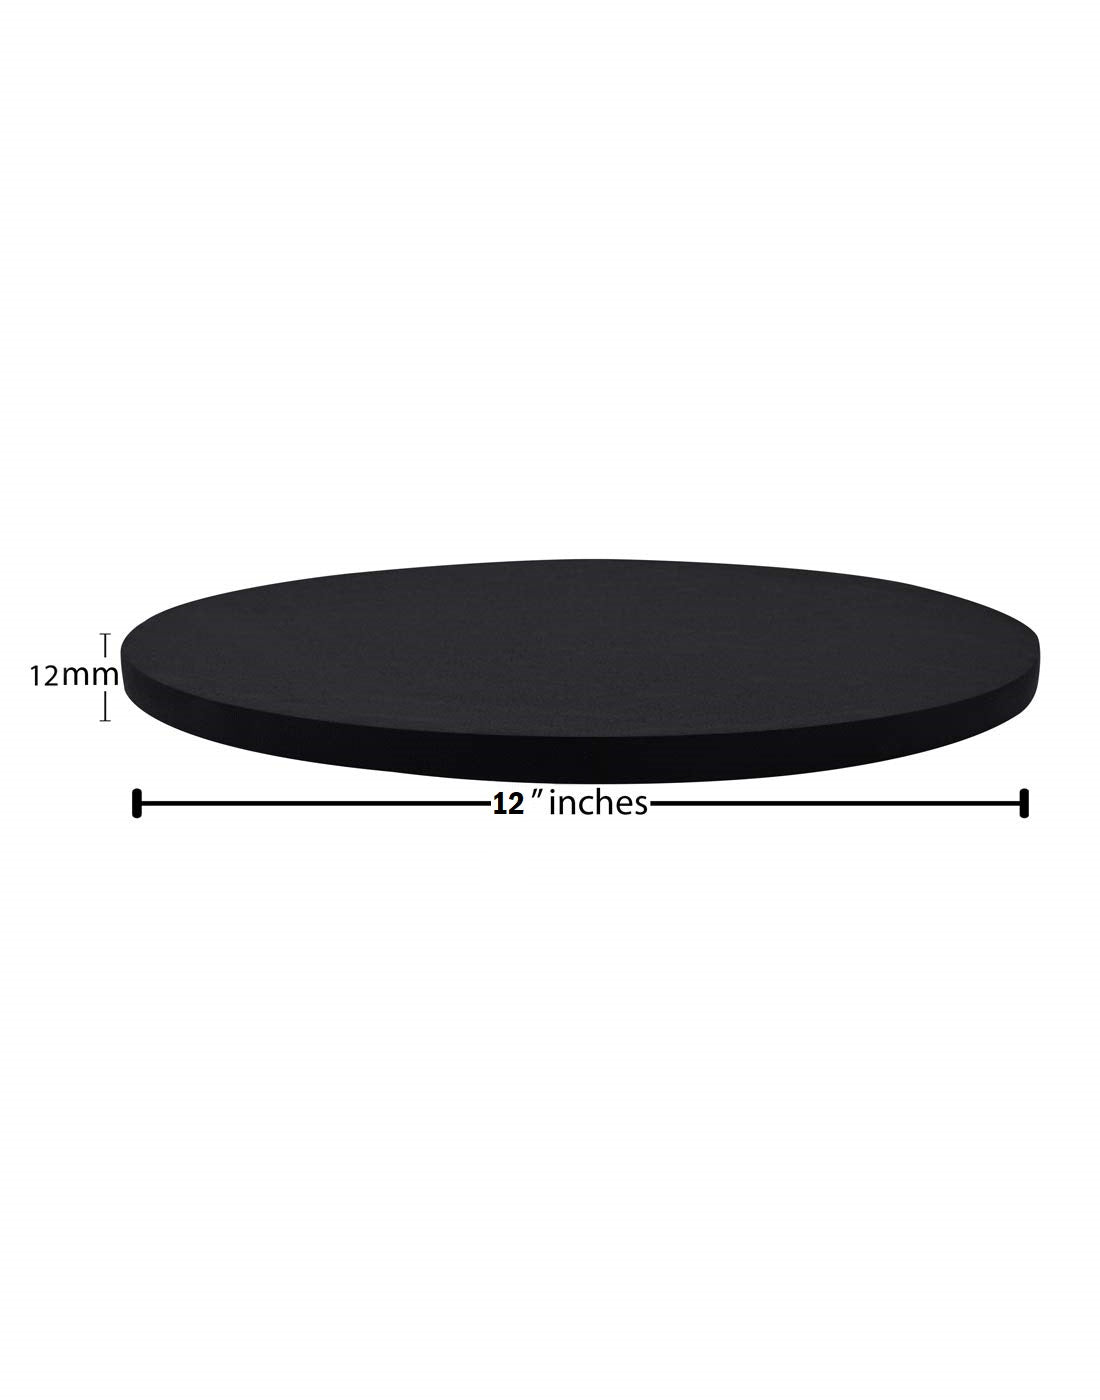 Round Black Drum Board/Drum Base for Cakes  Single Piece (12 Inches)